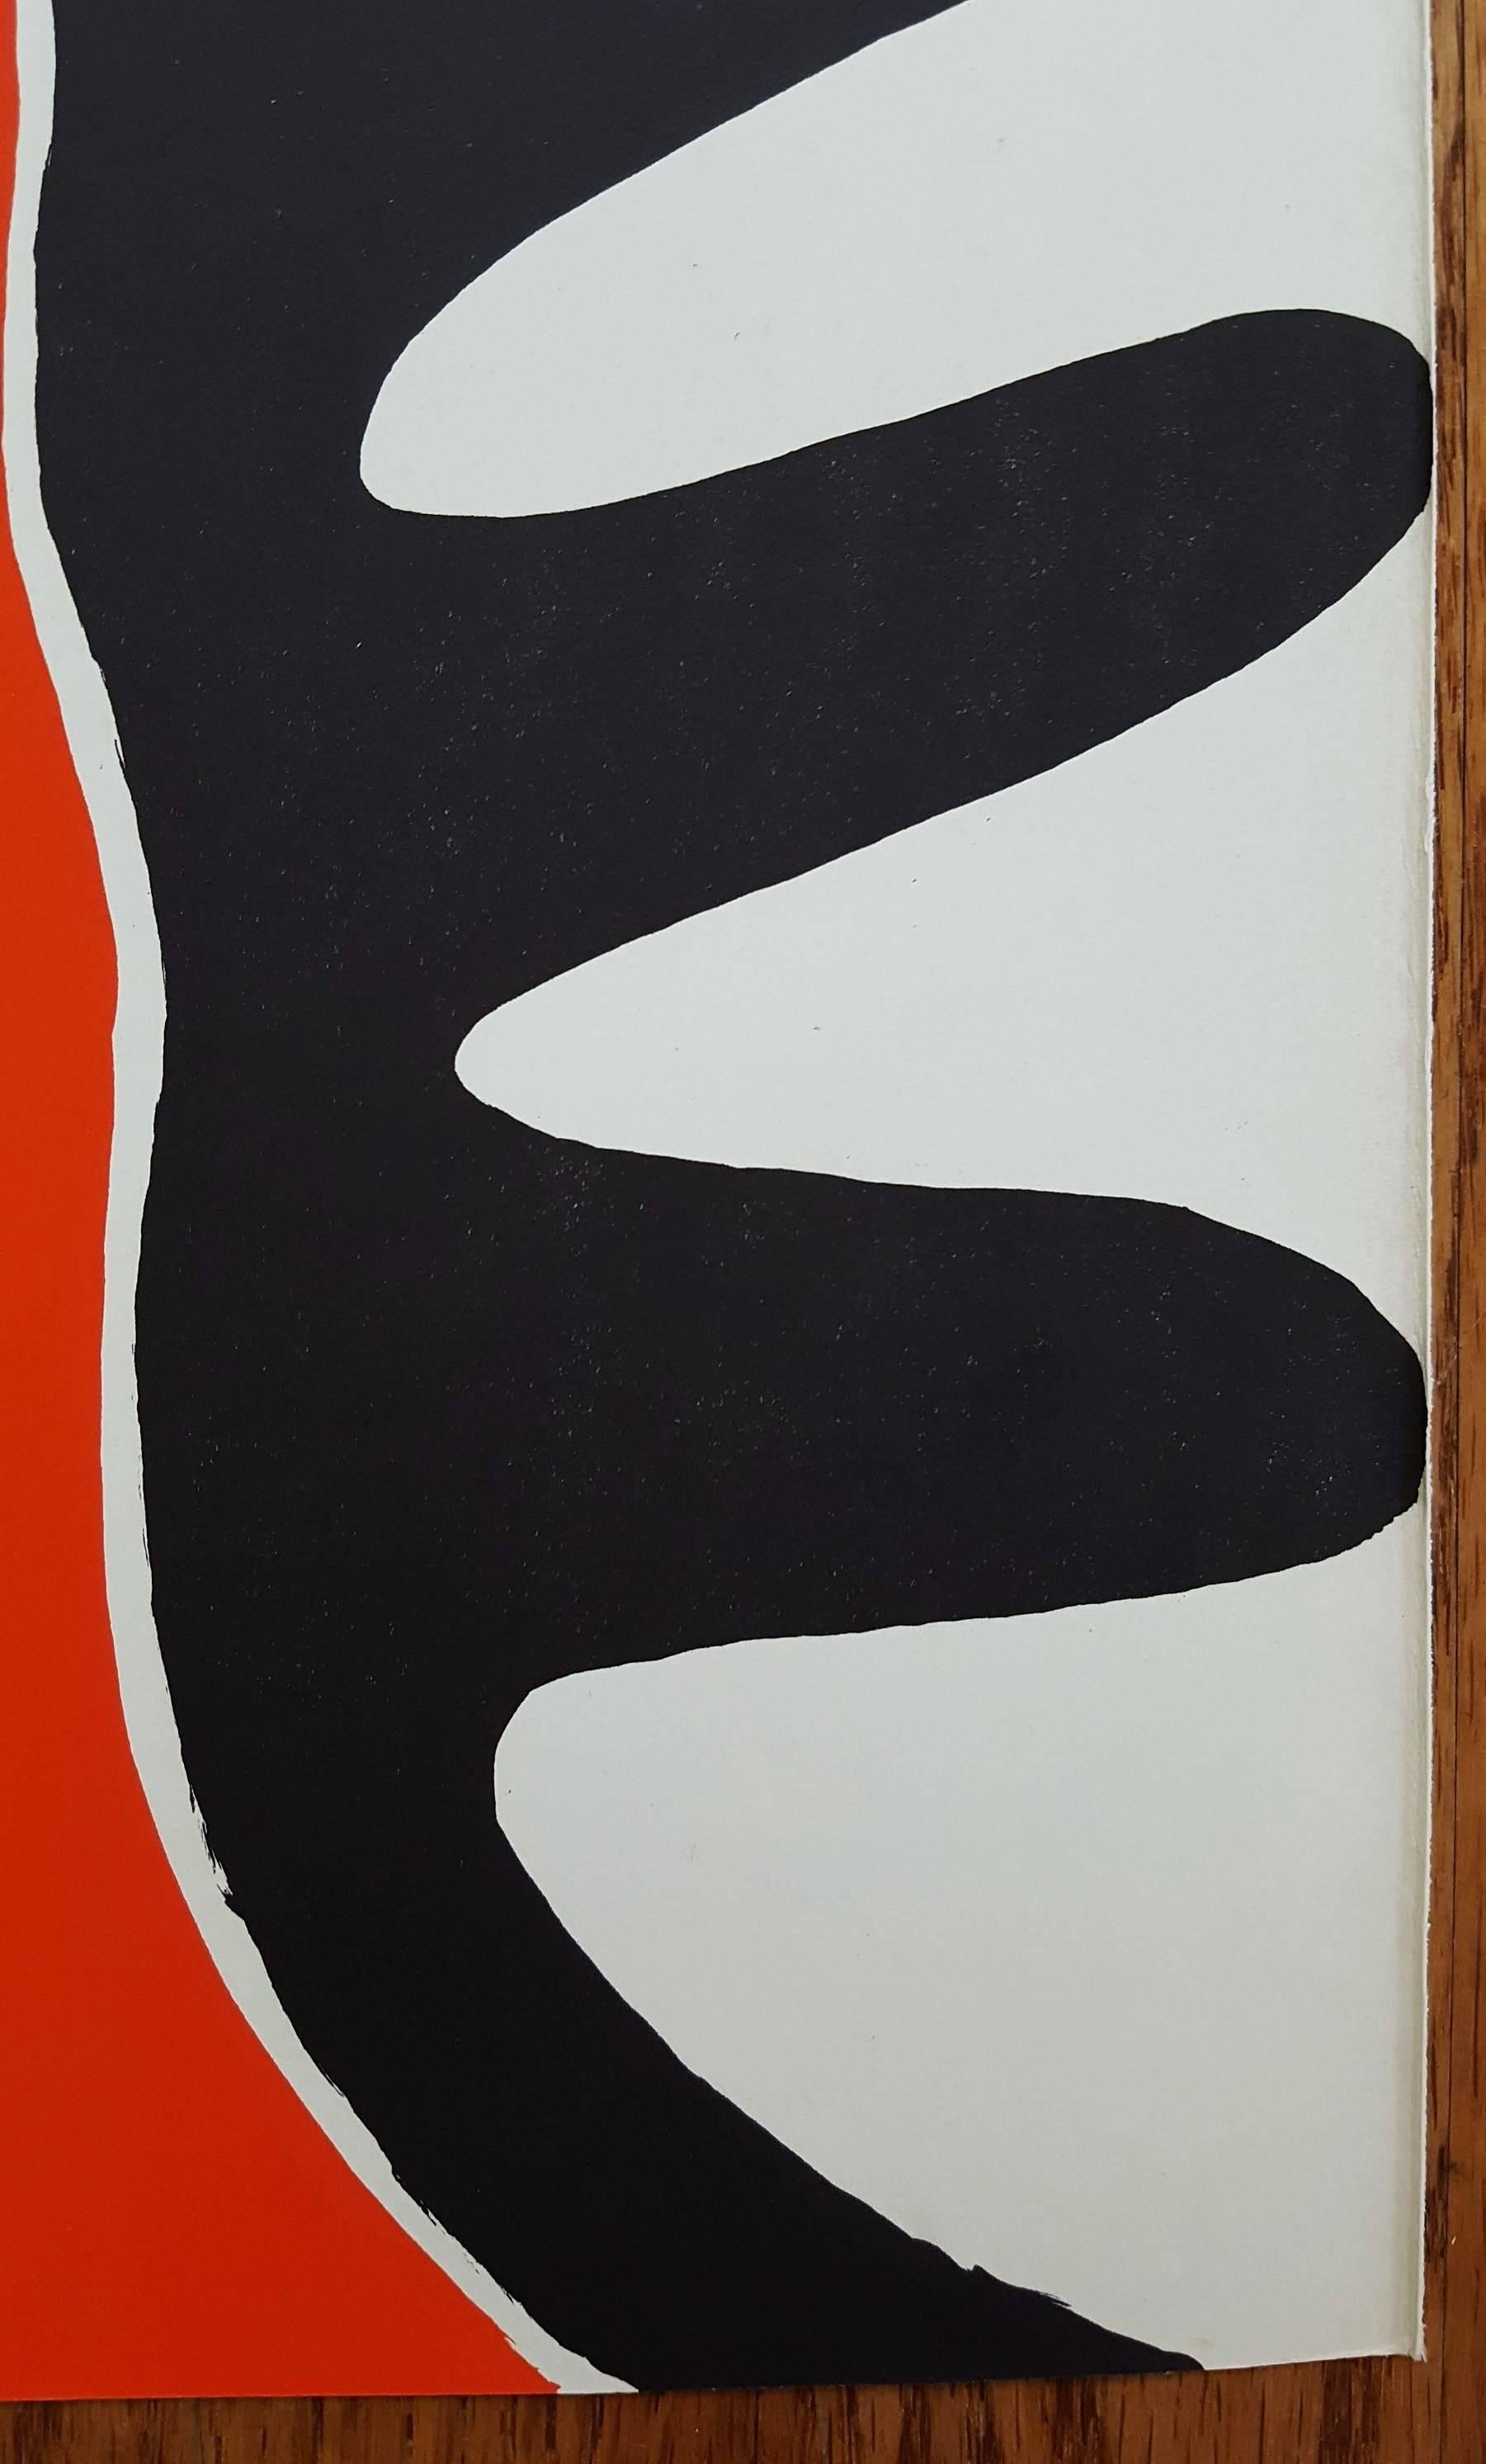 An original one page lithograph on smooth wove paper by American artist Alexander Calder (1898-1976) titled 